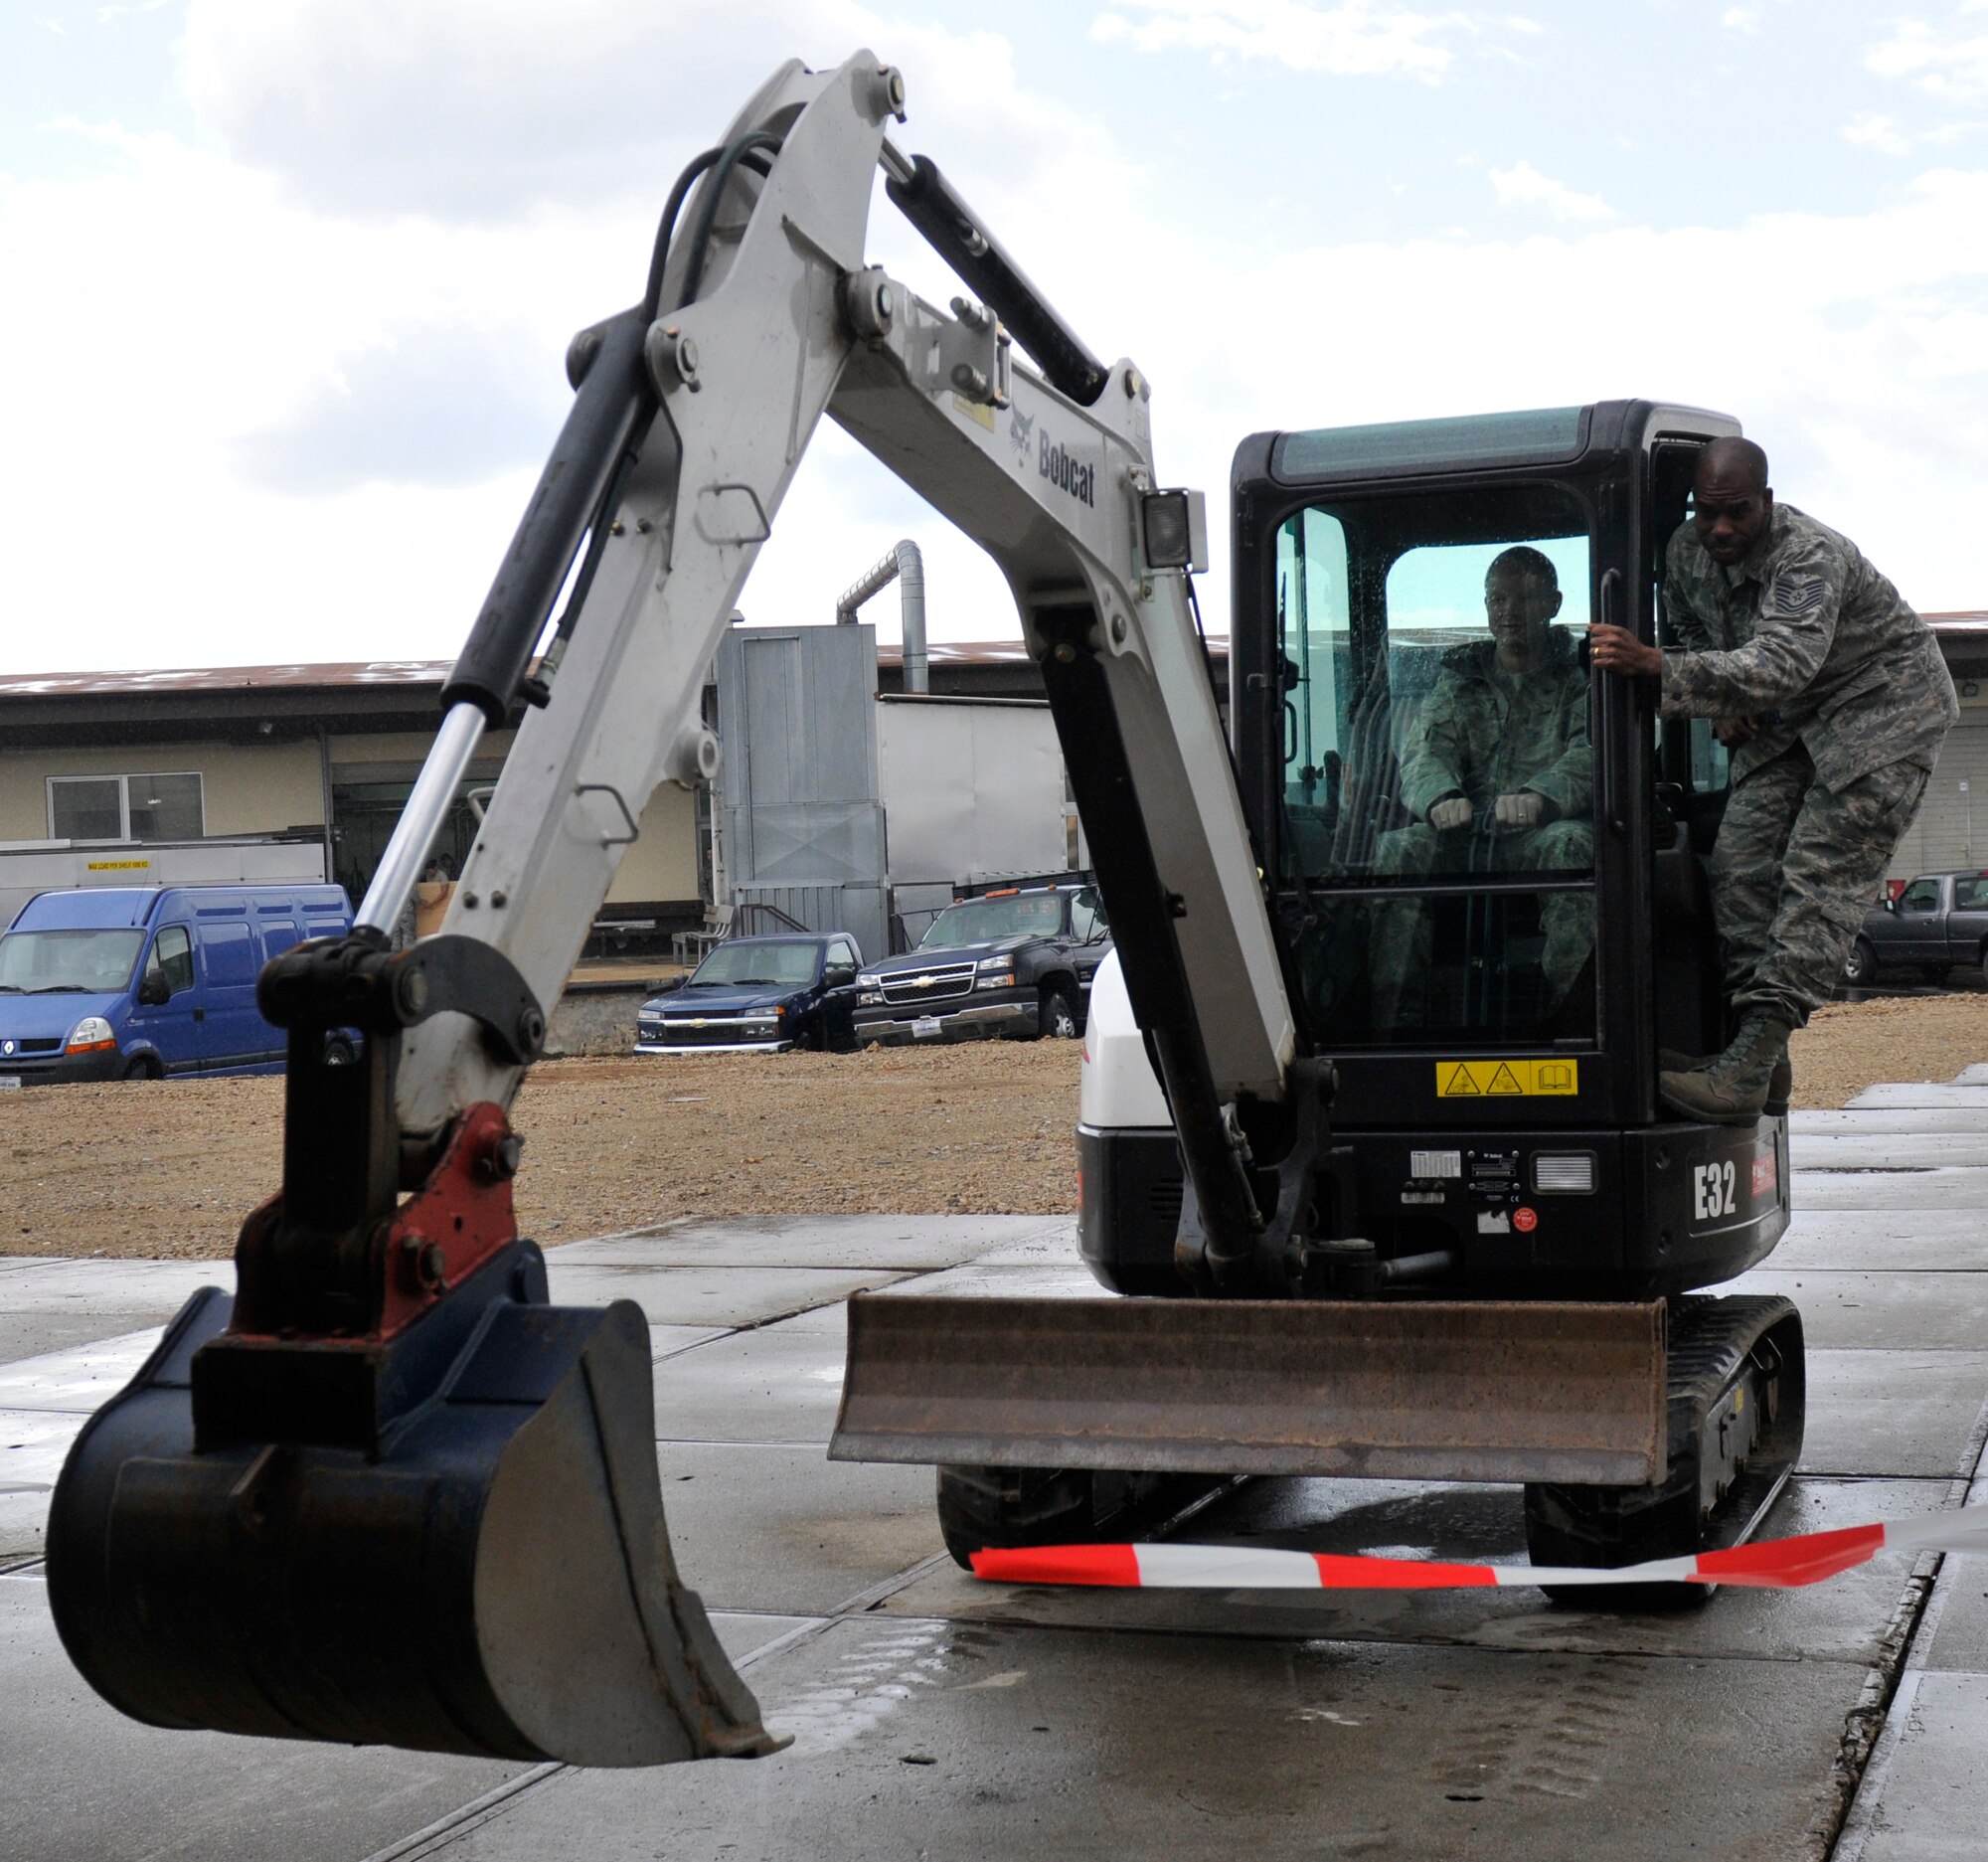 SPANGDAHLEM AIR BASE, Germany- Col. Christopher Weggeman, 52nd Fighter Wing commander, and Tech Sgt. Eric Wilson, 52nd Civil Engineer Squadron equipment operator, cut a ribbon using a Bobcat excavator here April 12. The ribbon-cutting ceremony took place after two warehouses were constructed by the 435th Construction and Training Squadron from Ramstein Air Base, Germany. The warehouses were built to consolidate materials and manpower in preparation for the Bitburg Annex closure. (U.S. Air Force photo/Airman 1st Class Brittney Frees)